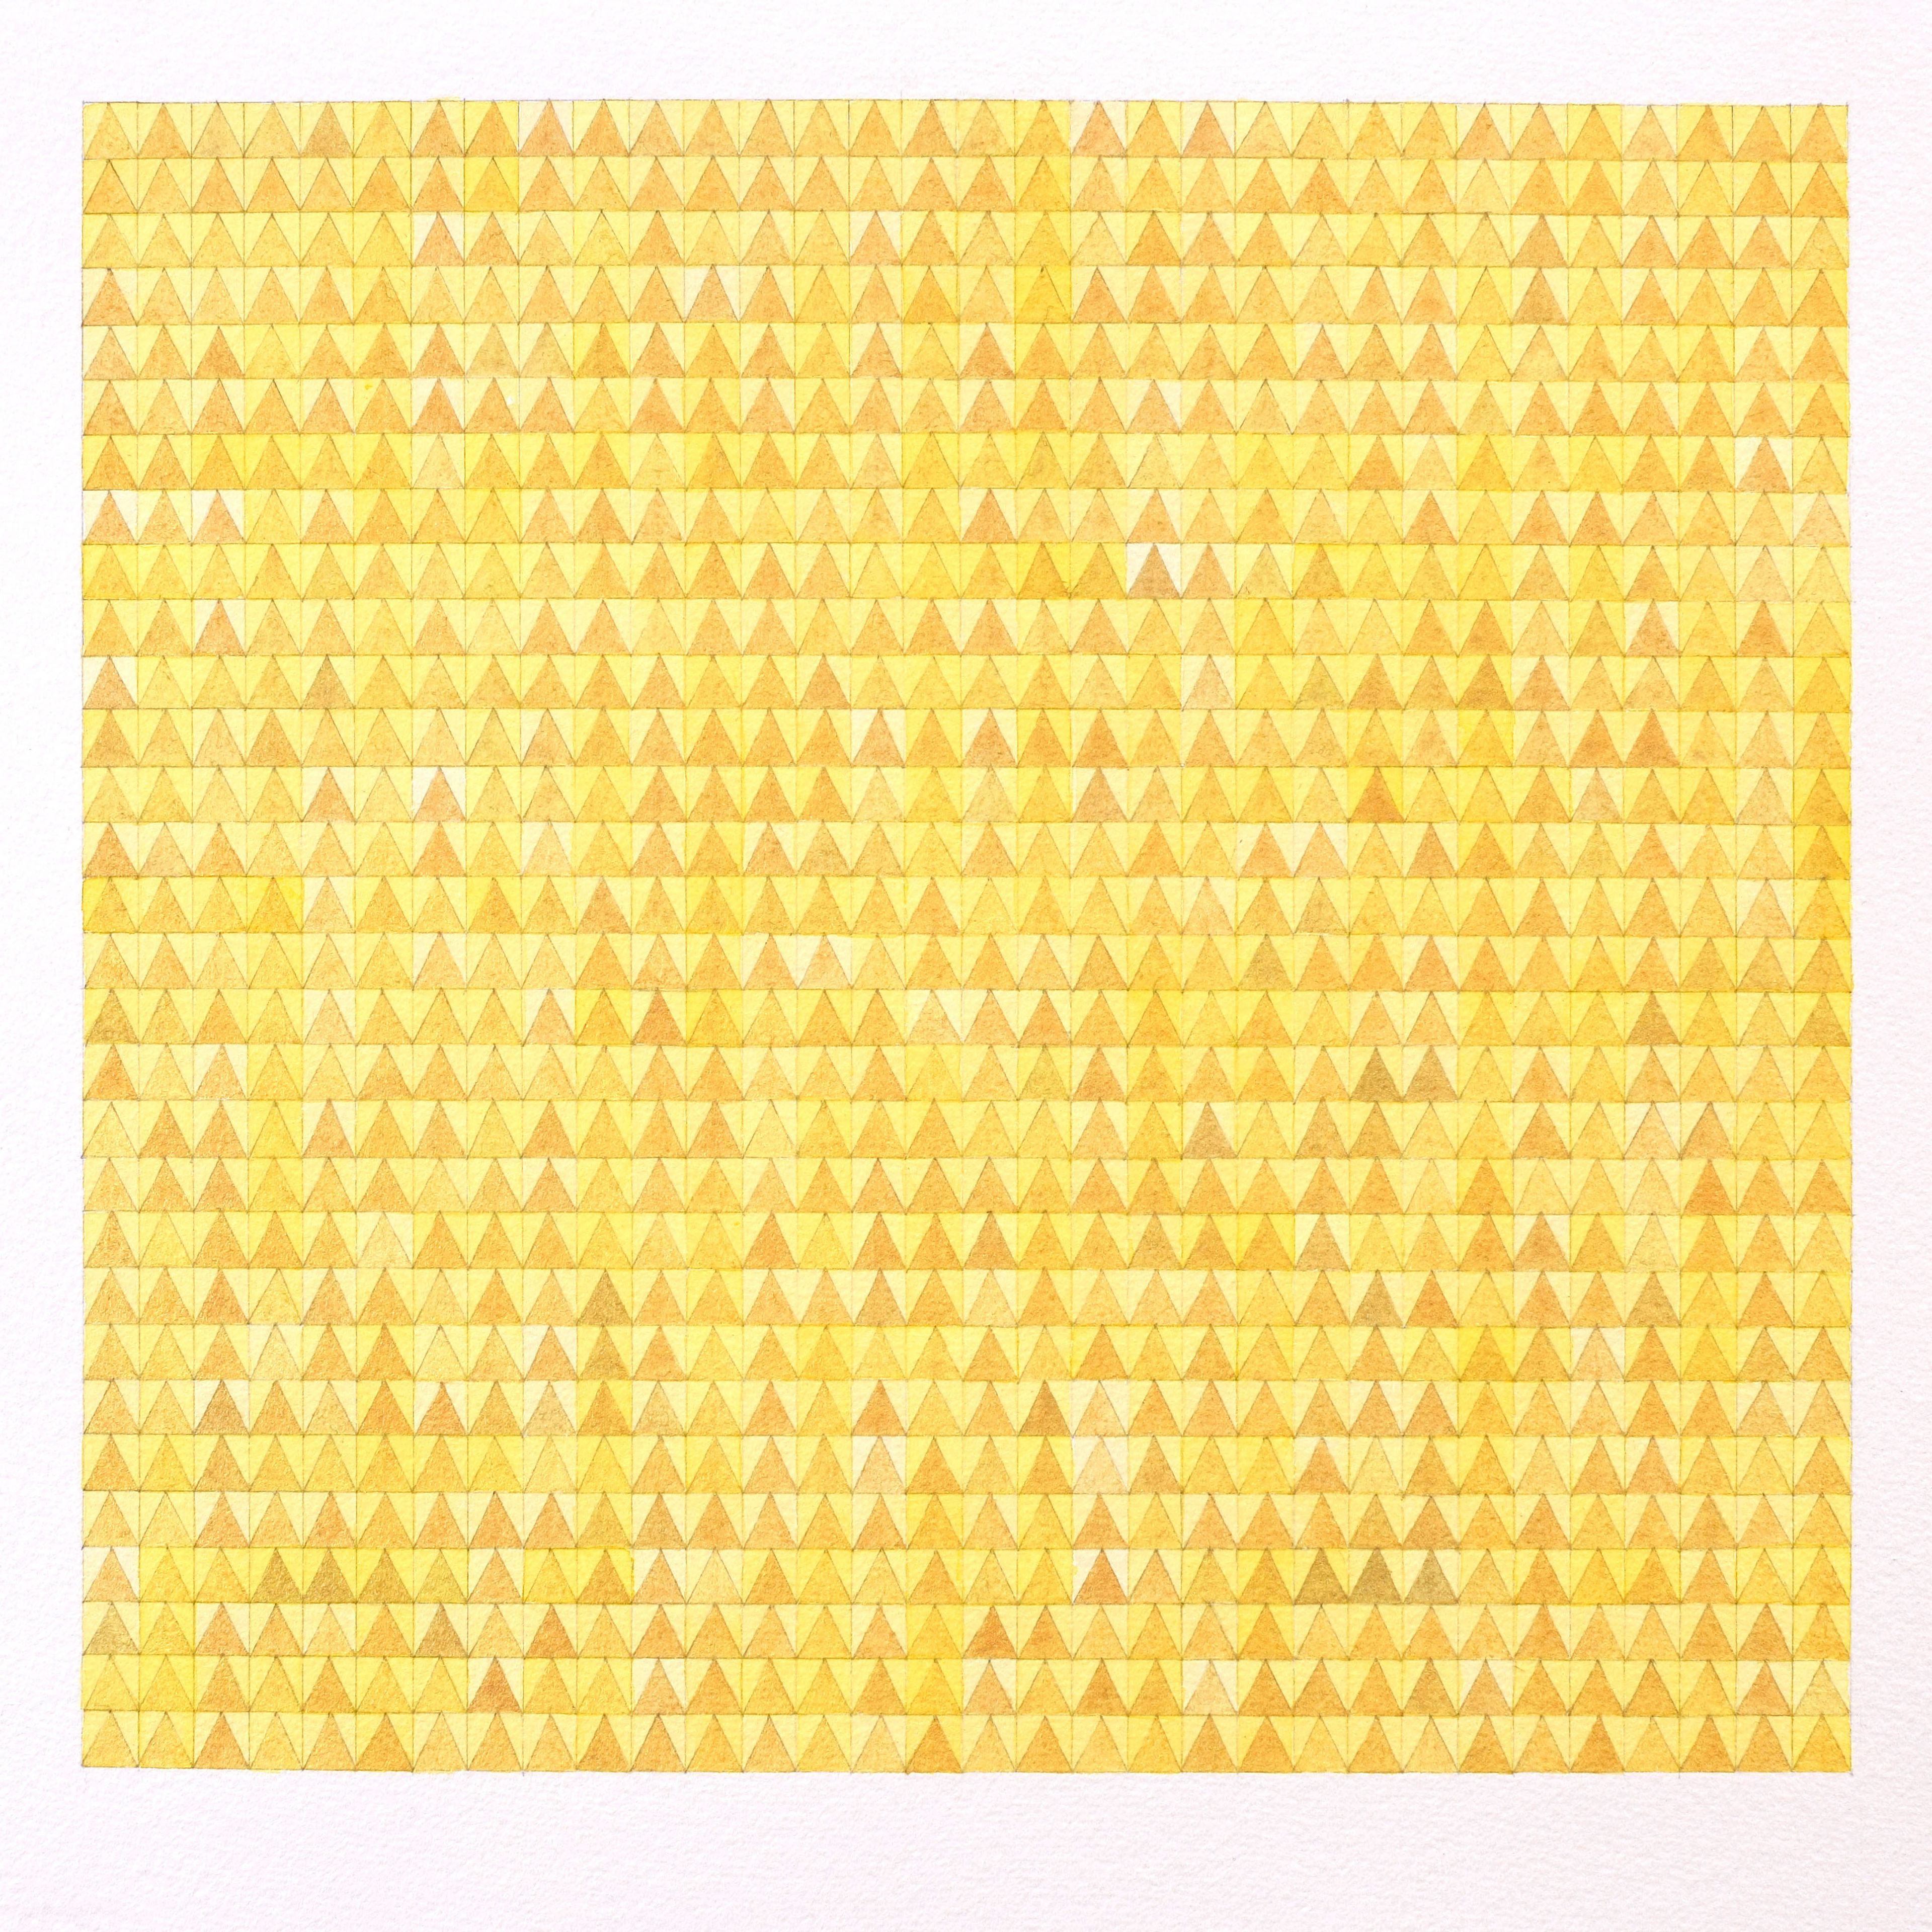 painted delicate yellow triangular grid various shades